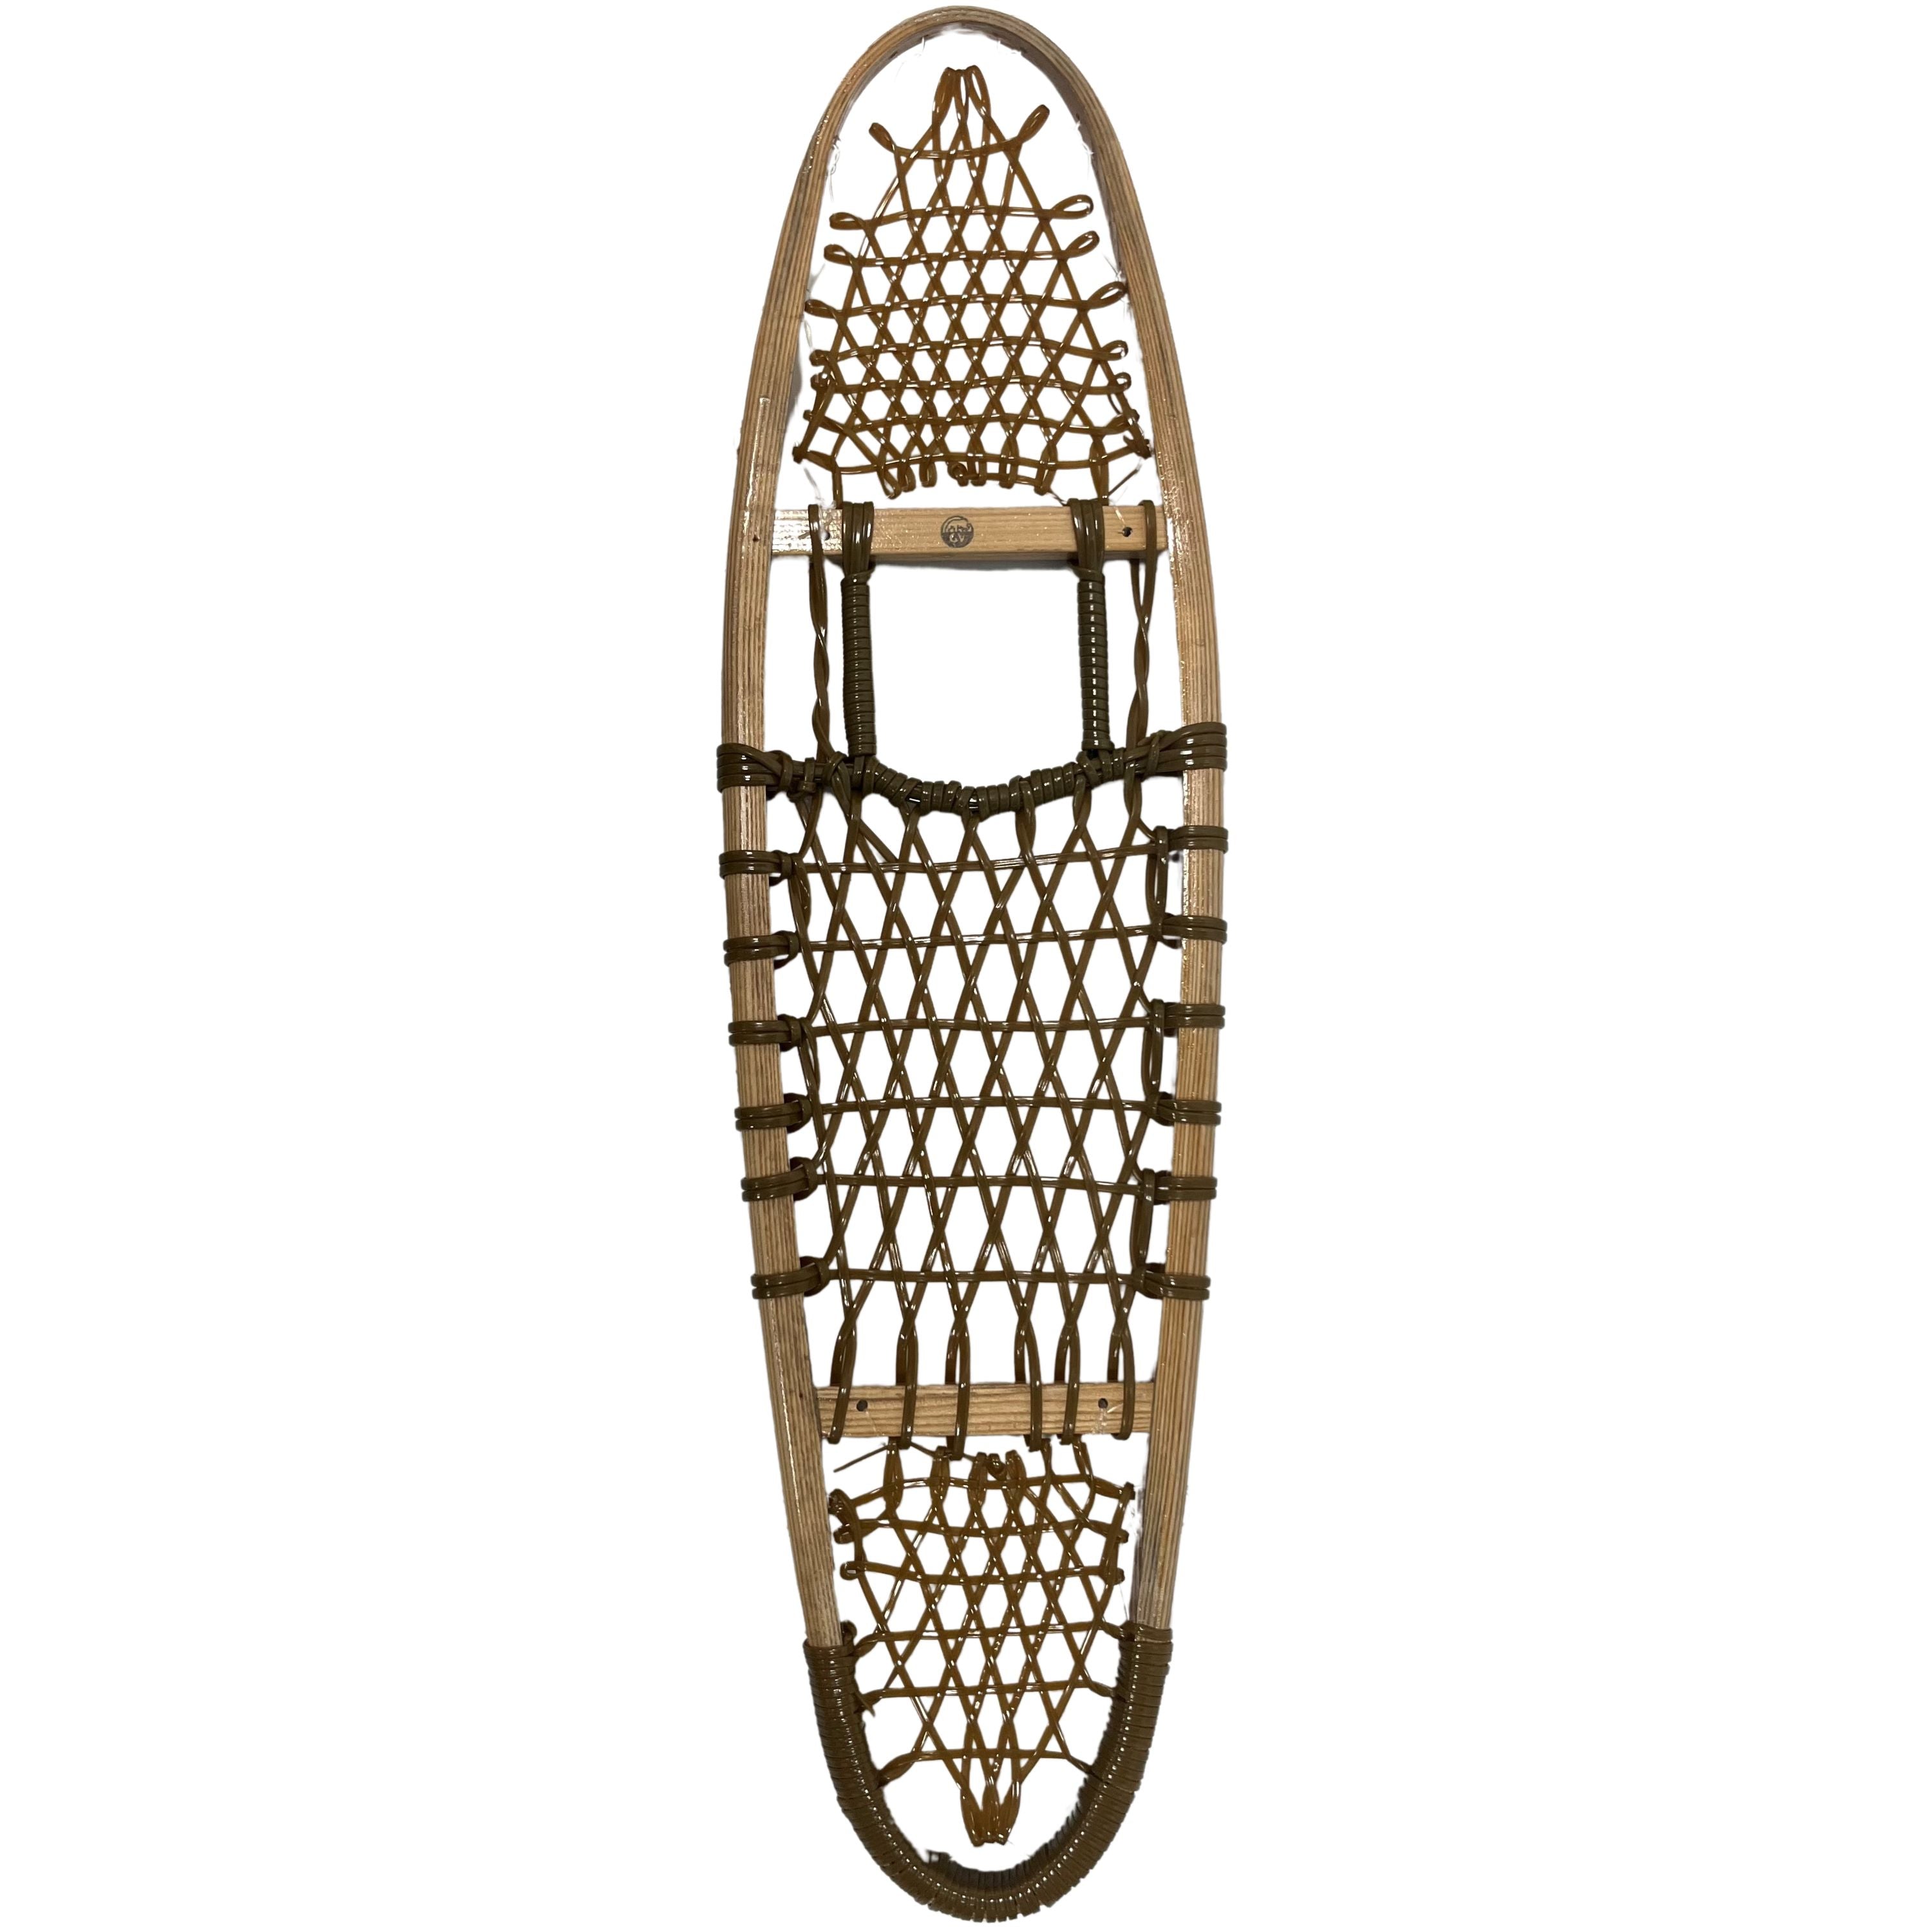 Wood snowshoes with synthetic laces - Modified bear paw